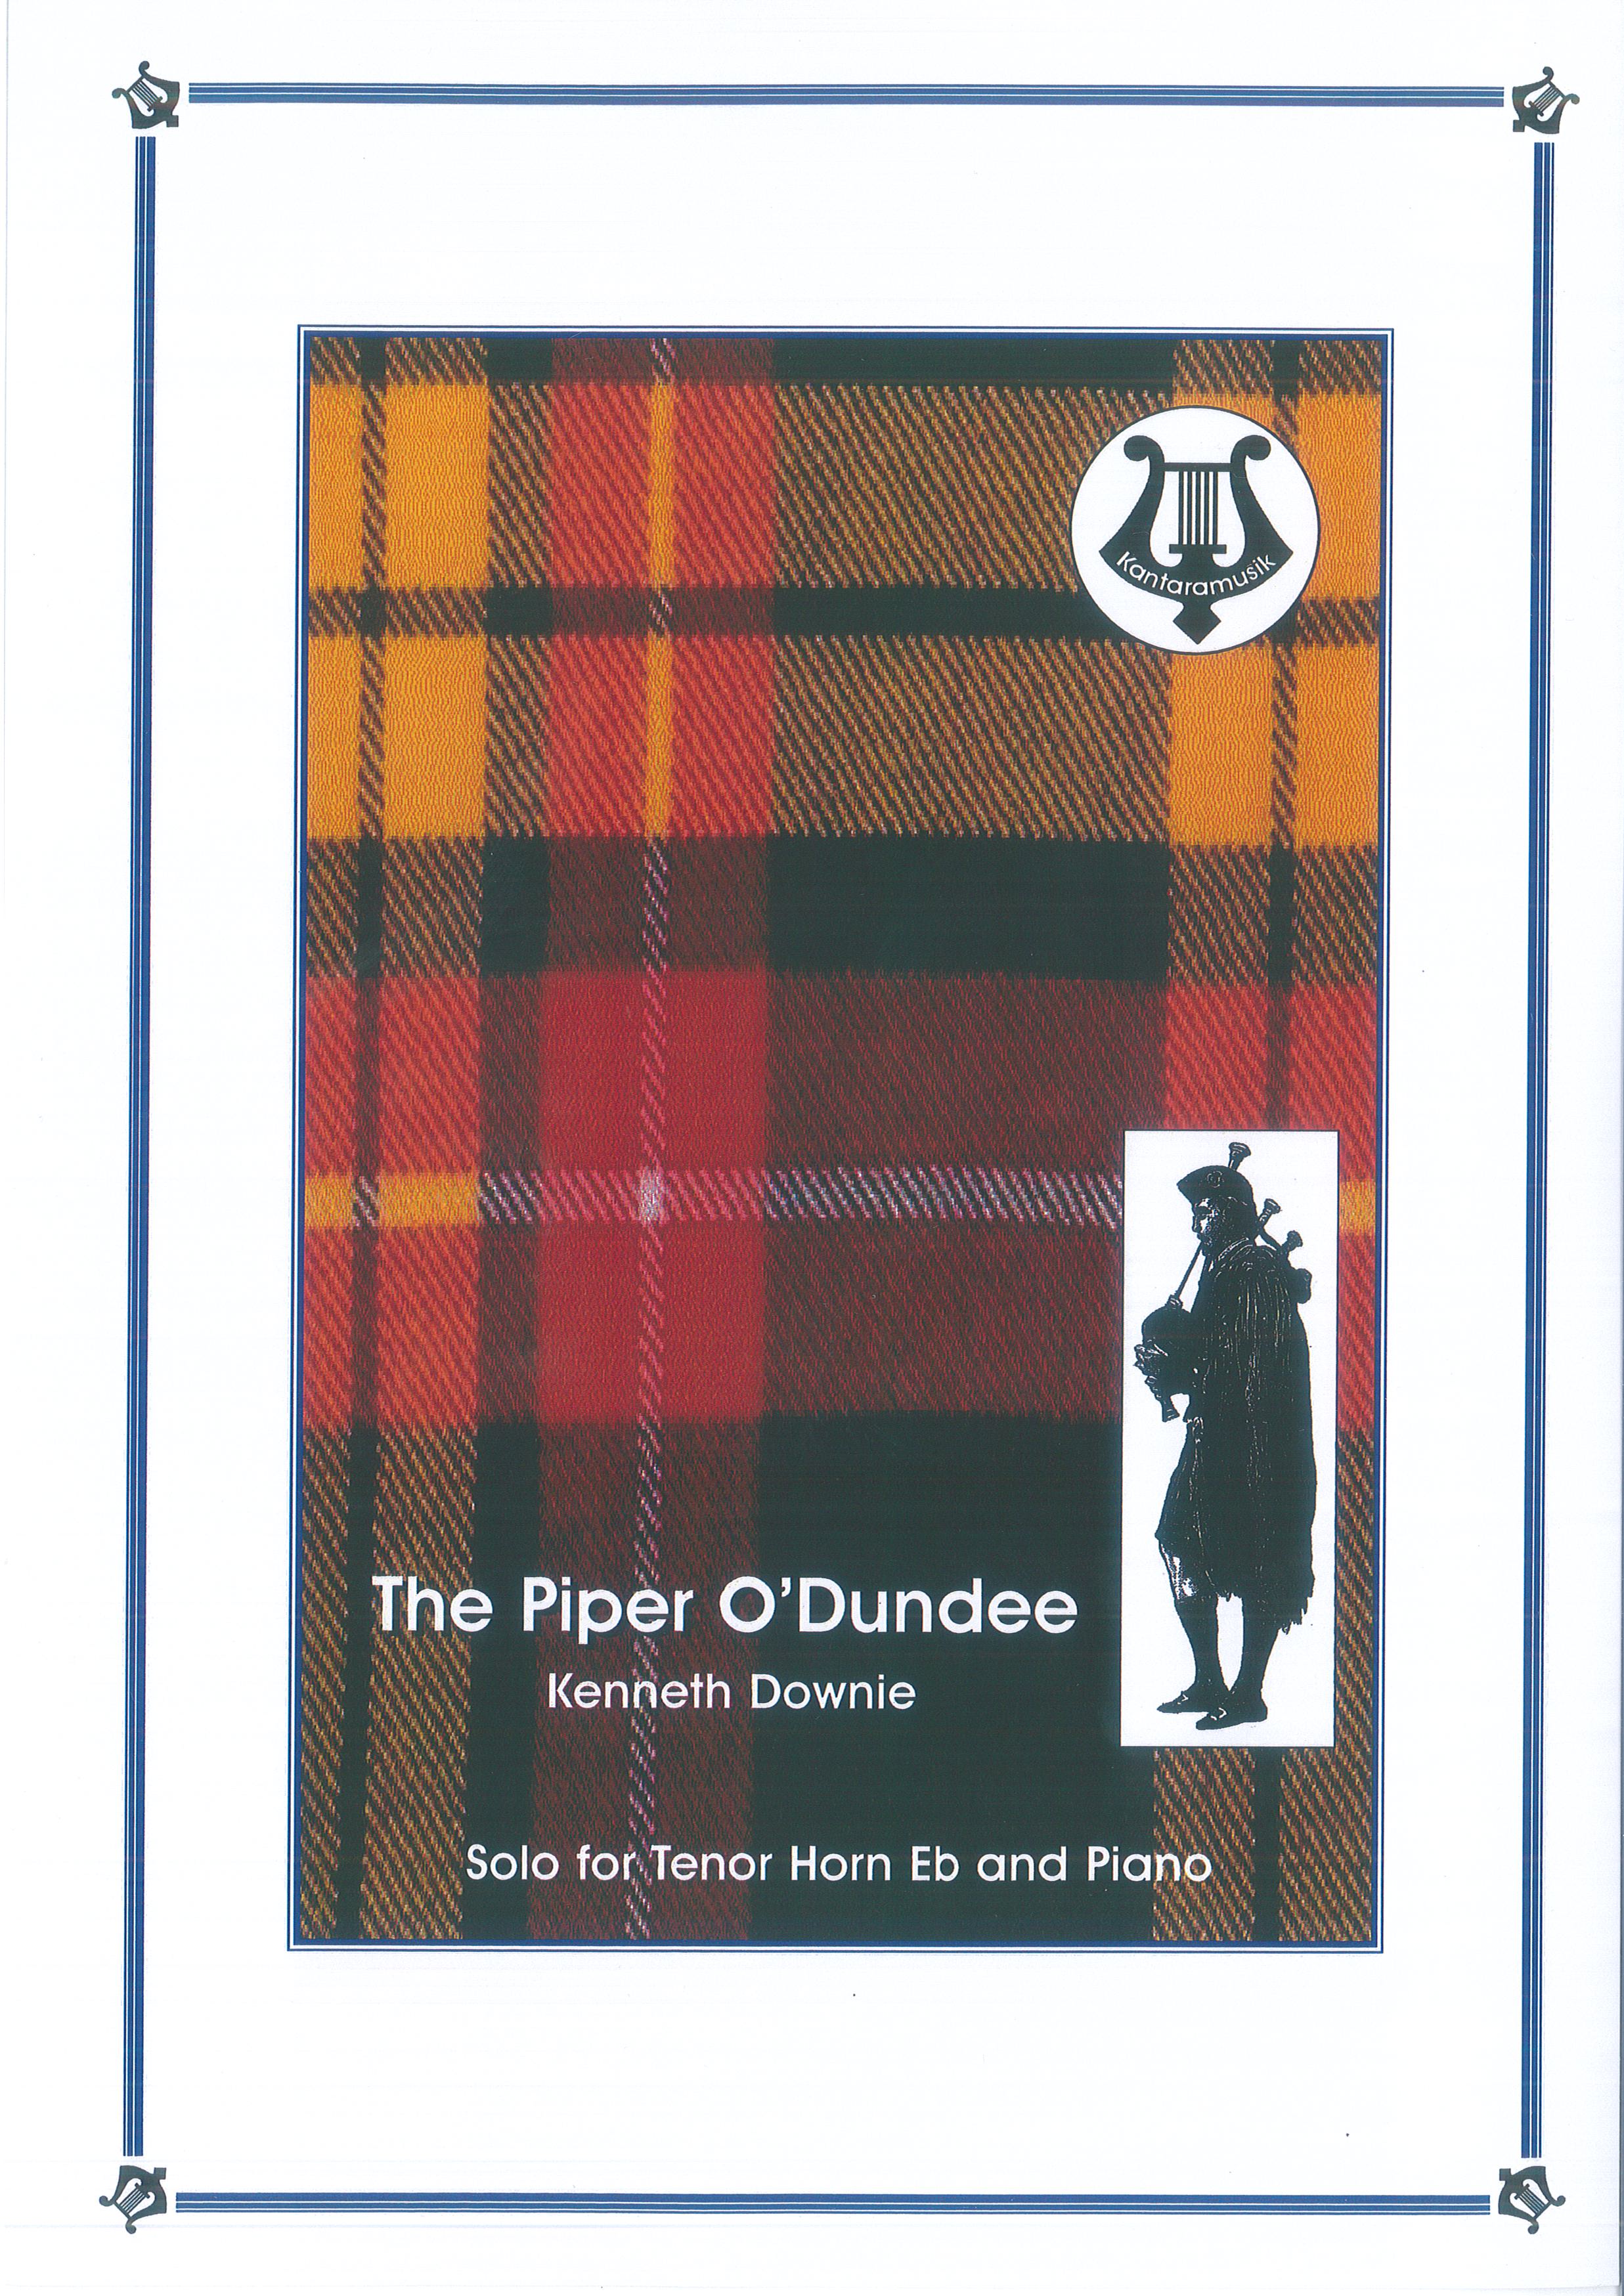 Piper of Dundee (Tenor Horn and Piano)